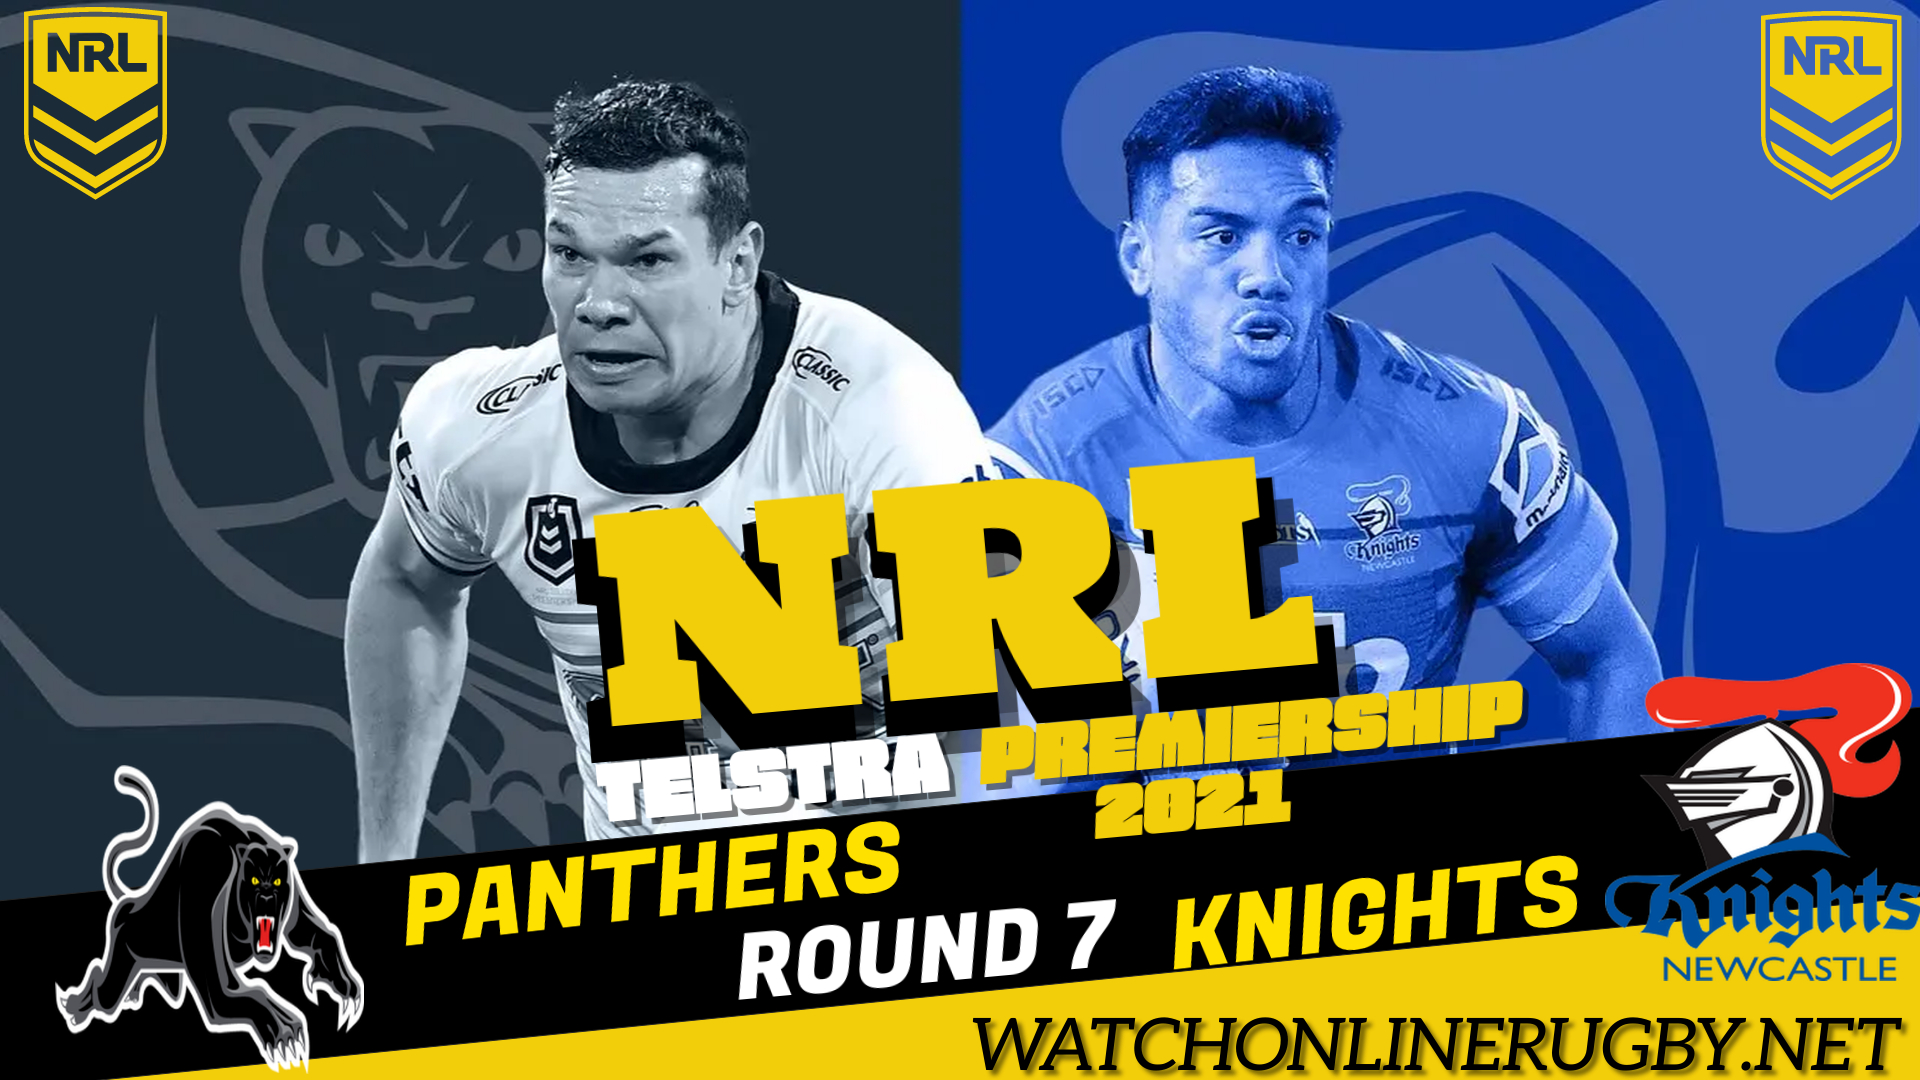 panthers-vs-knights-nrl-live